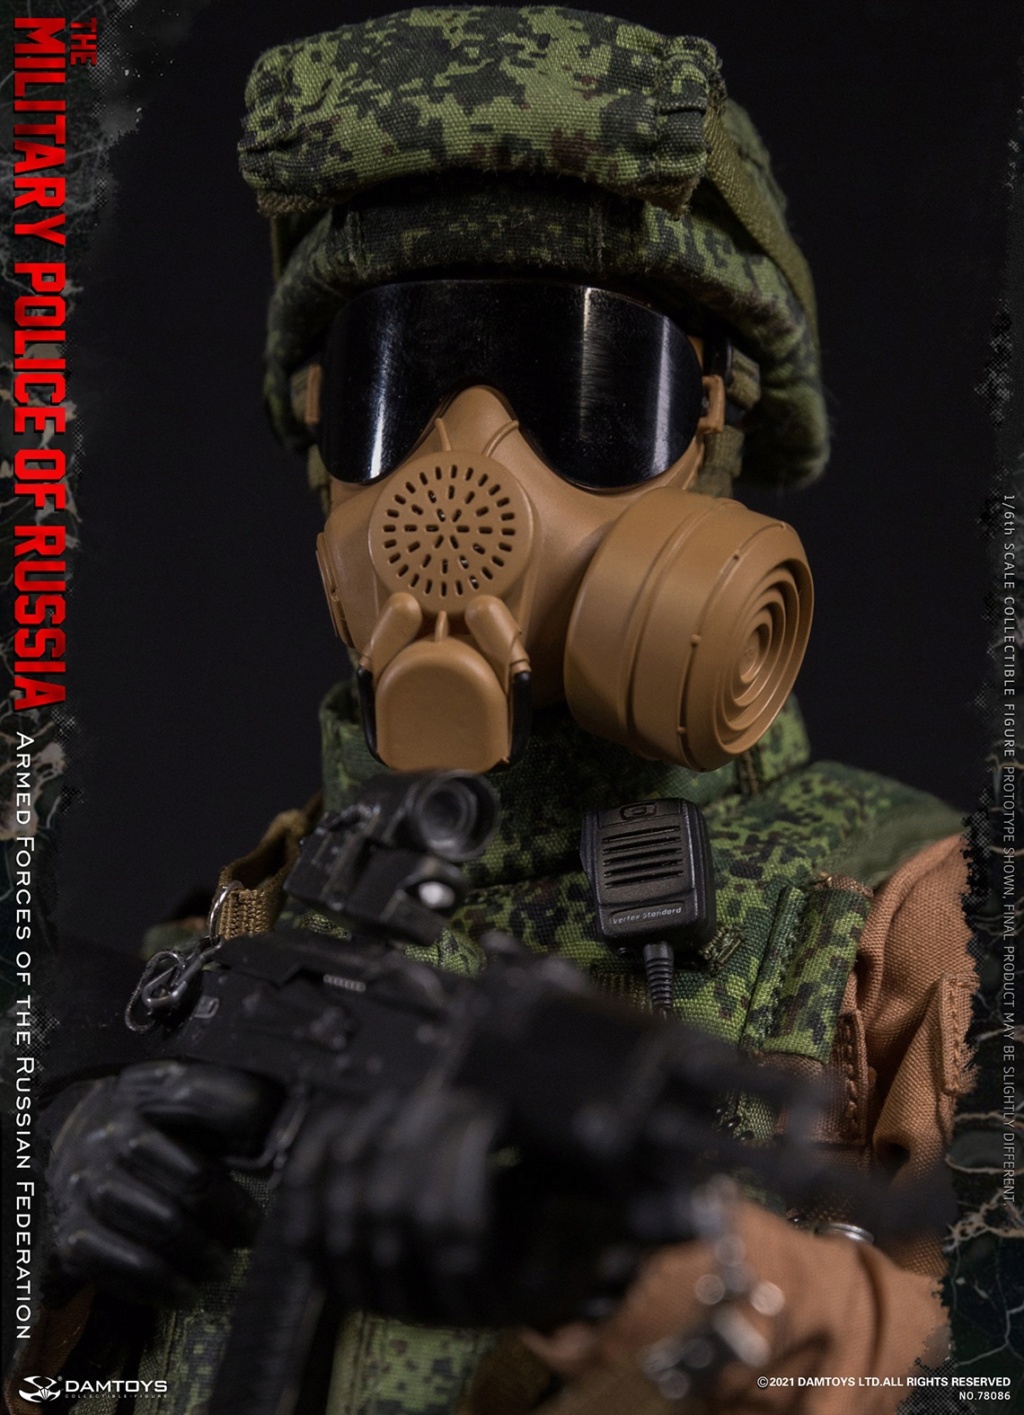 Gendarmerie - NEW PRODUCT: DAMTOYS: 1/6 Russian Federation Armed Forces-Gendarmerie #78086 15043711